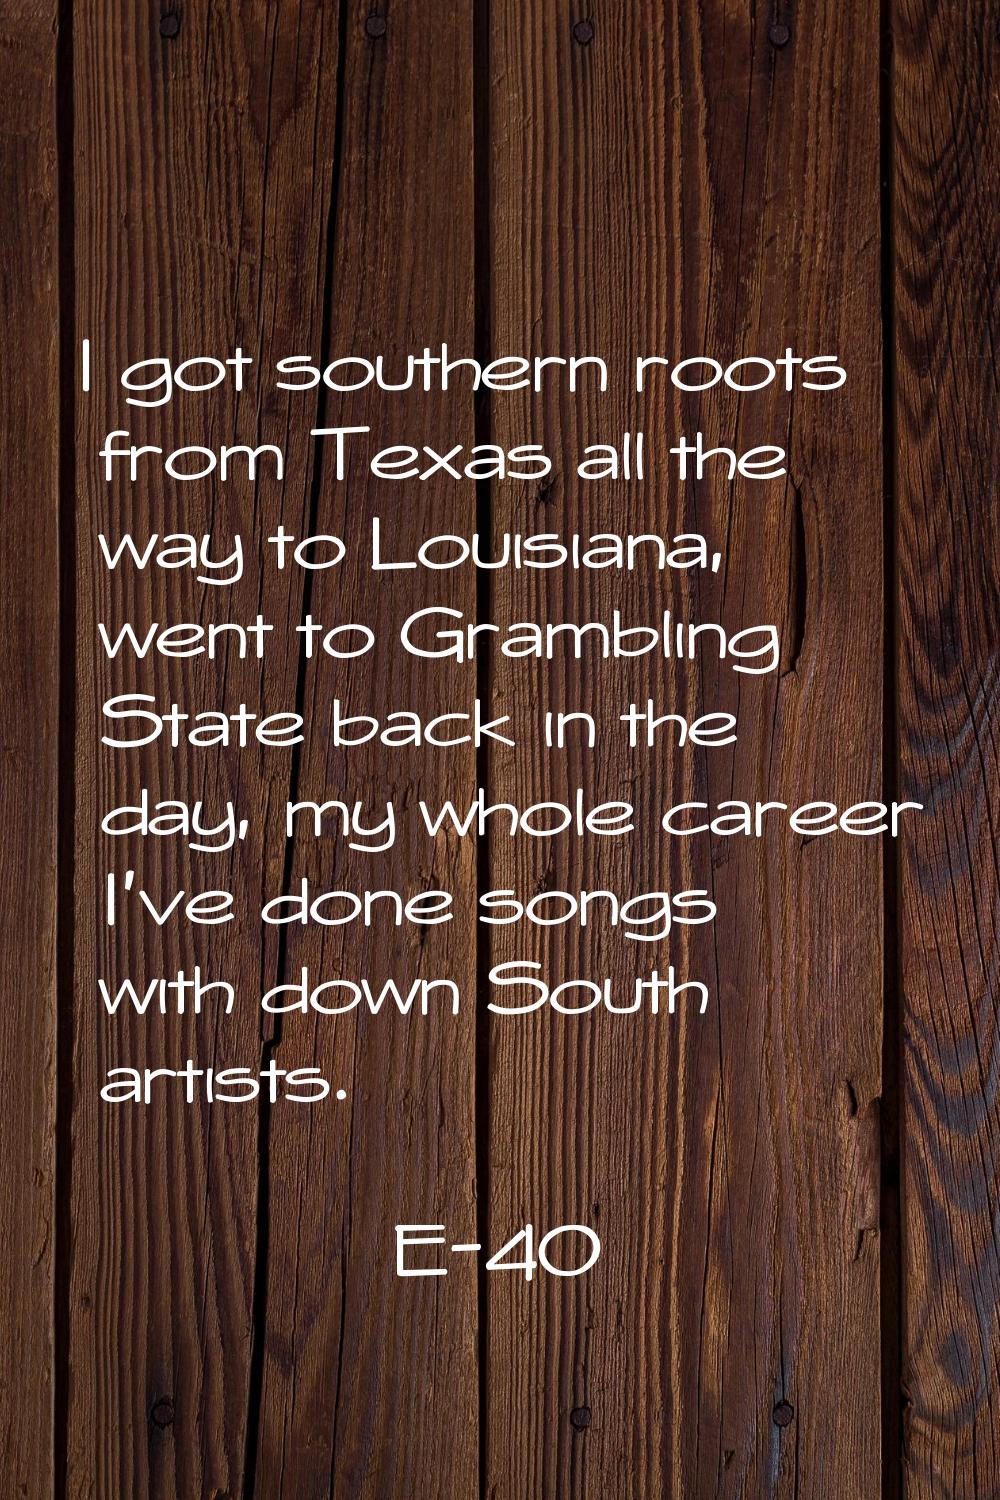 I got southern roots from Texas all the way to Louisiana, went to Grambling State back in the day, 